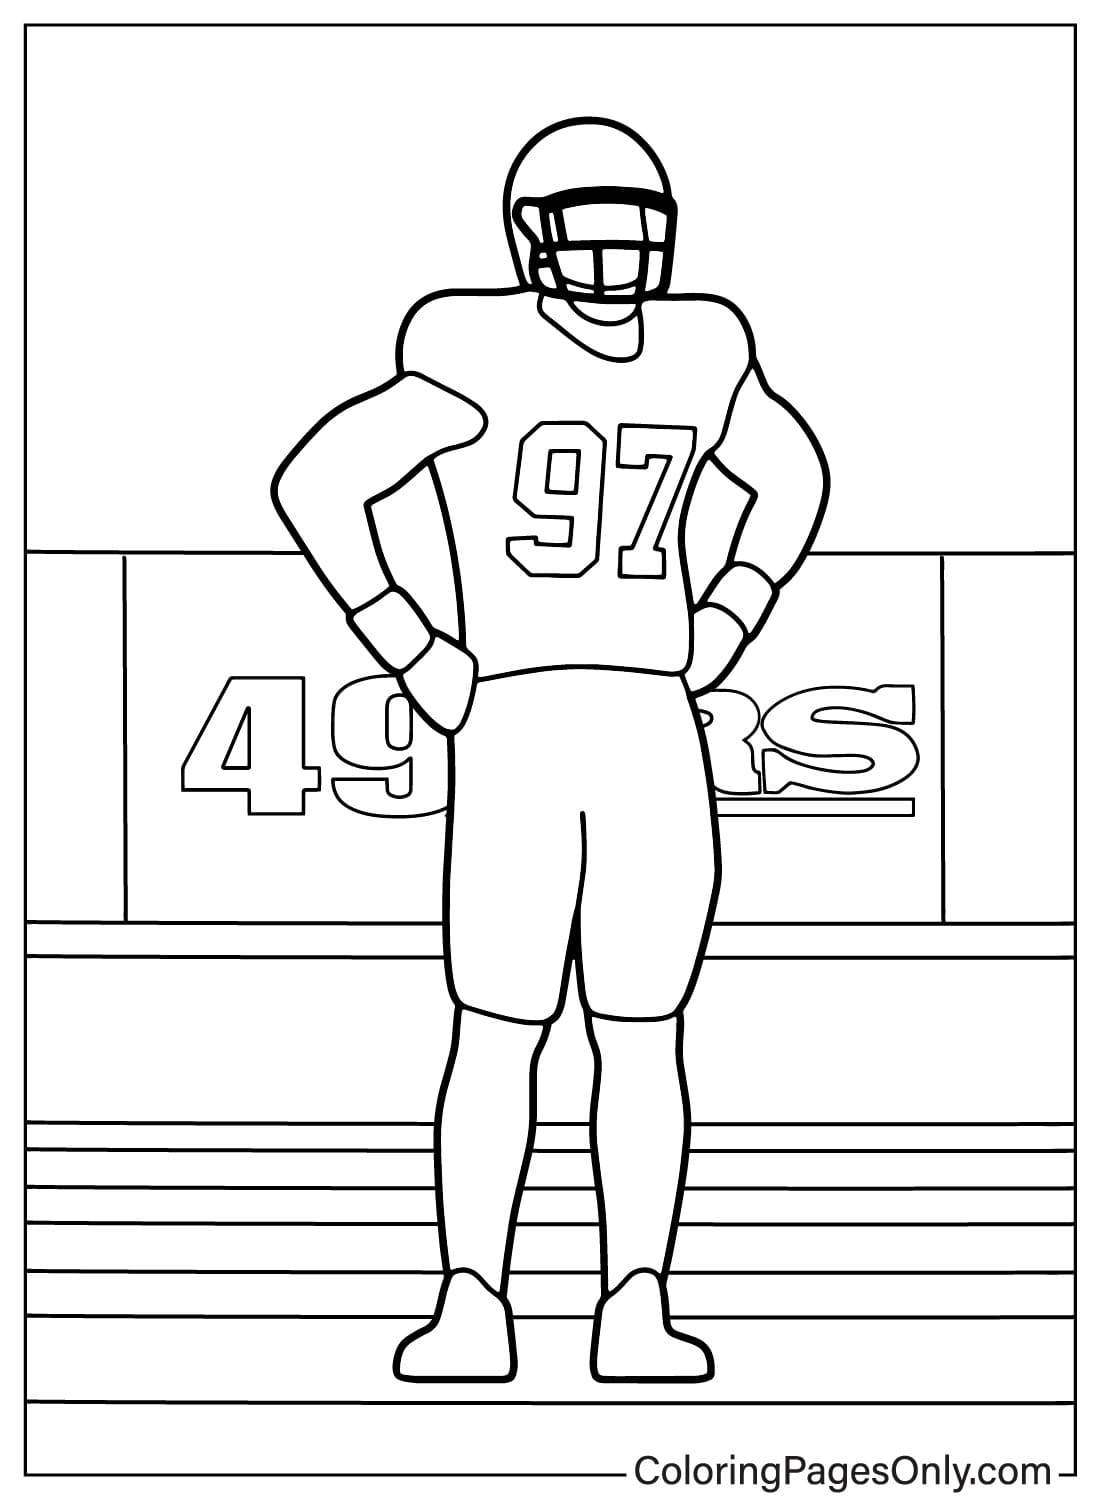 Free Nick Bosa Coloring Page from San Francisco 49ers